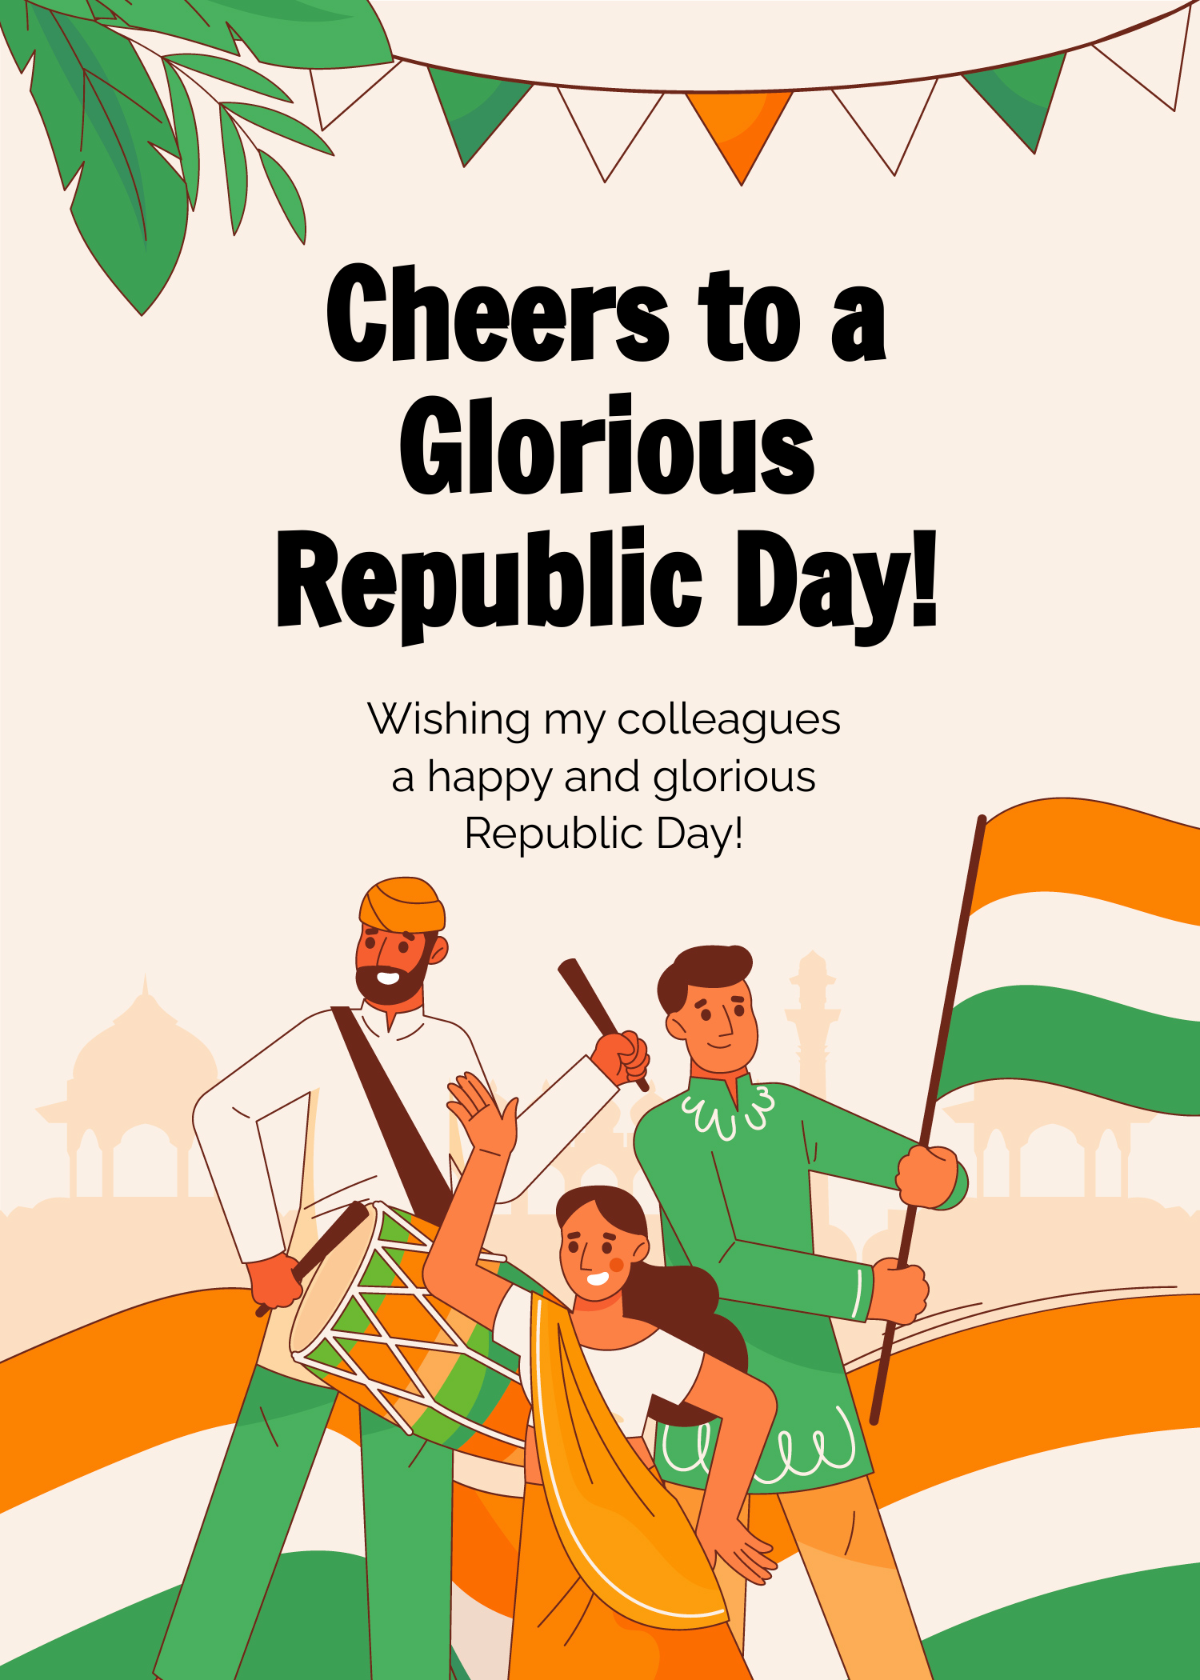 Republic Day Wishes to Colleagues